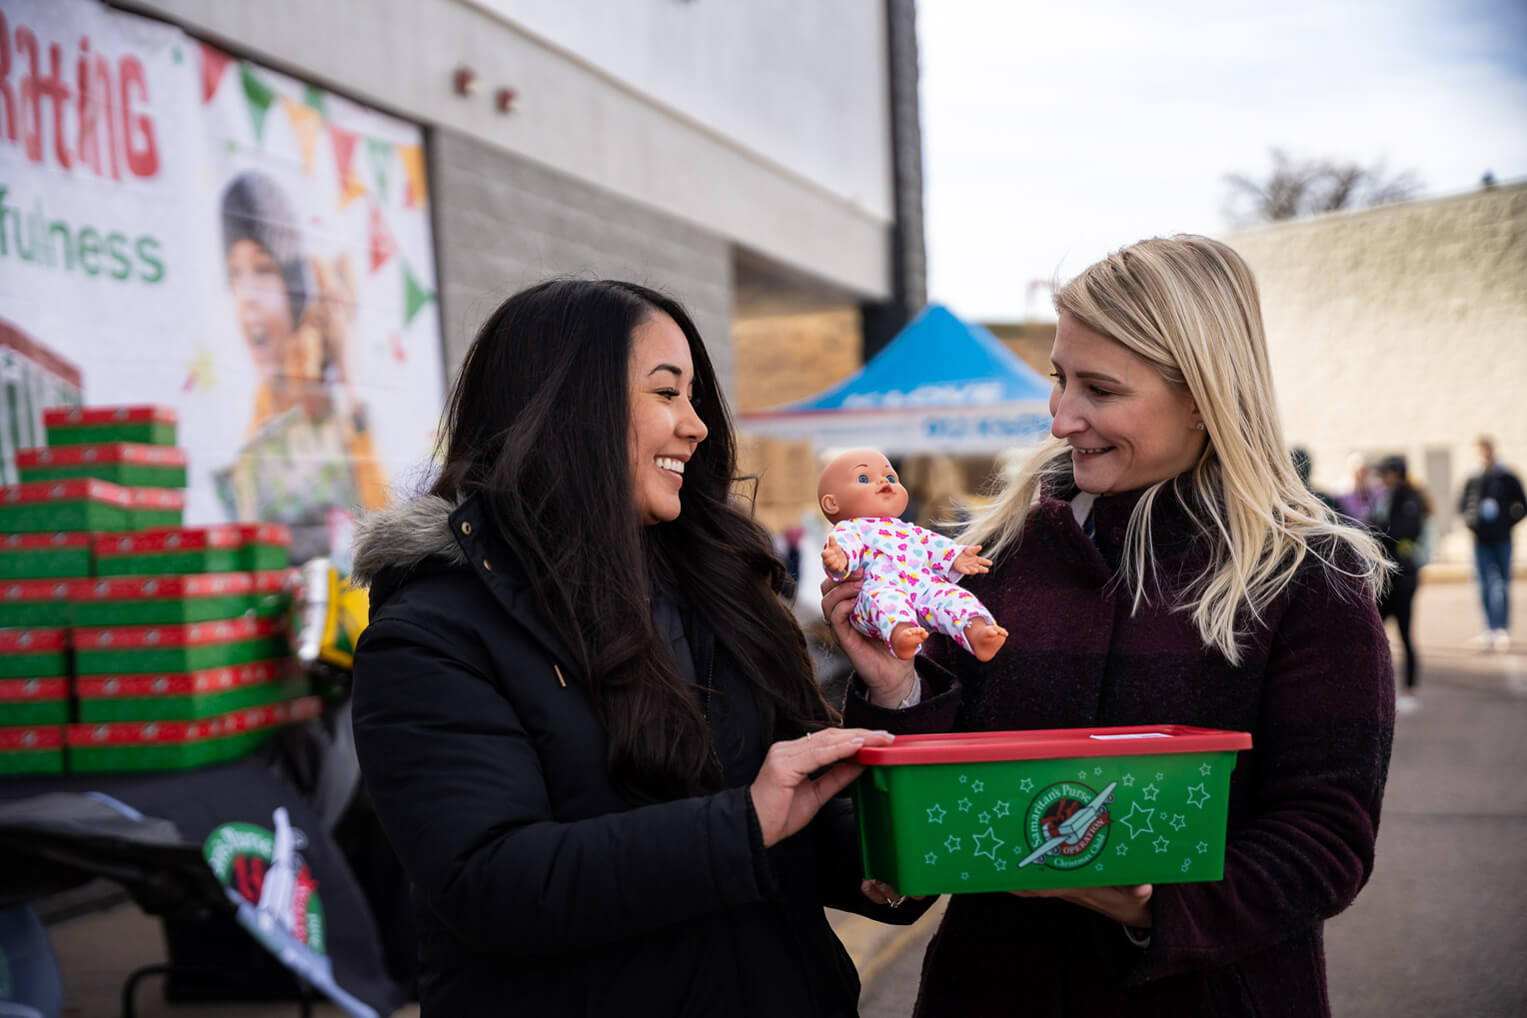 Elizabeth, right, received a shoebox gift as an orphan living in Ukraine.